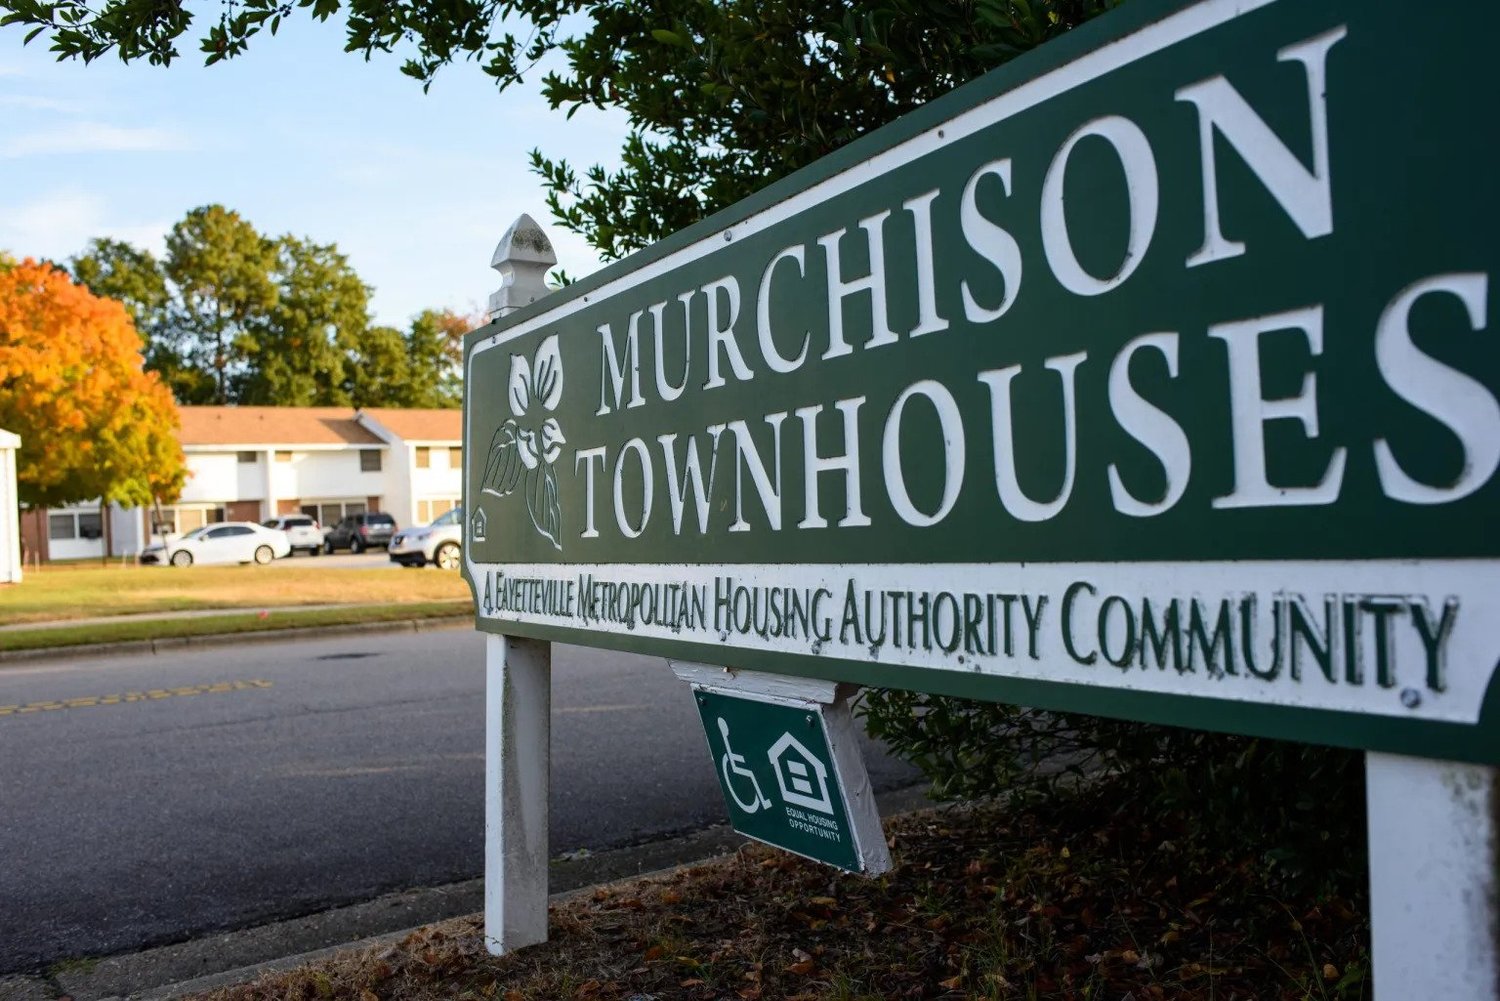 The Fayetteville City Council recently approved an affordable housing plan for the wider Murchison neighborhood, the first step in a potentially long federal approval process. The plan consists of renovating 110 units at Elliot Circle and 60 units at Murchison Townhomes.